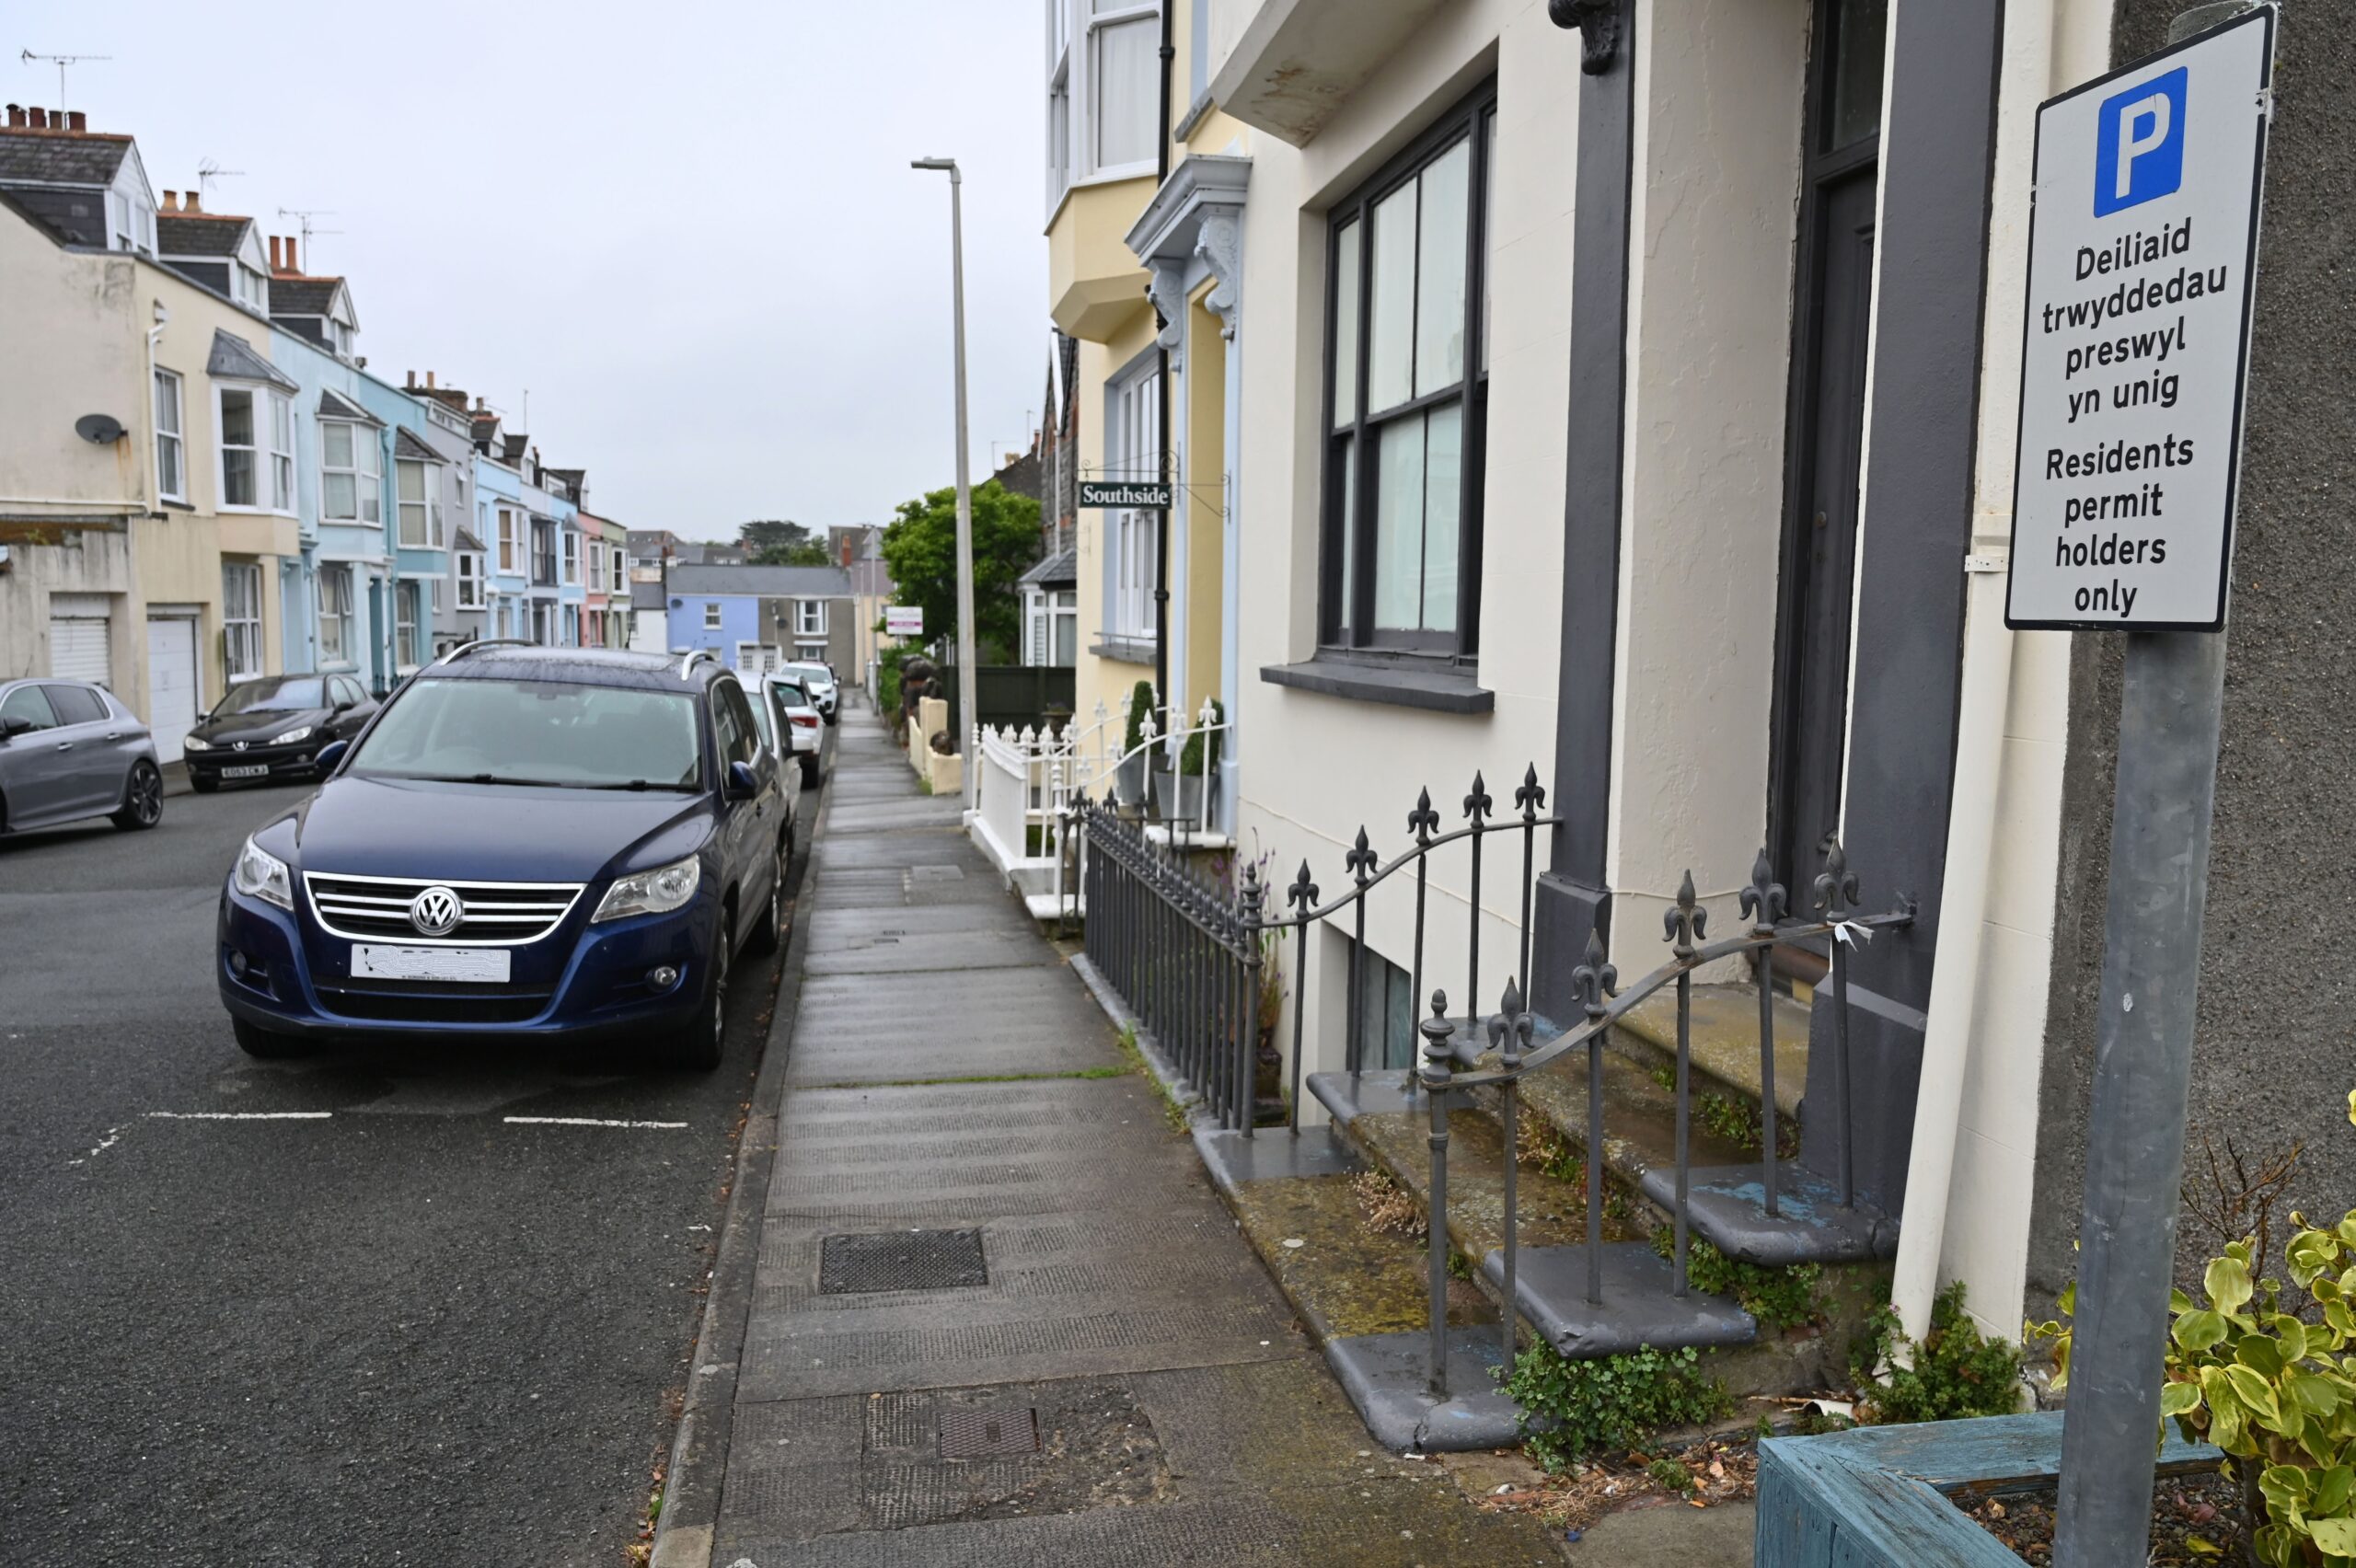 Calls to review sale of residents parking to holidaymakers in Pembrokeshire expected to be turned down